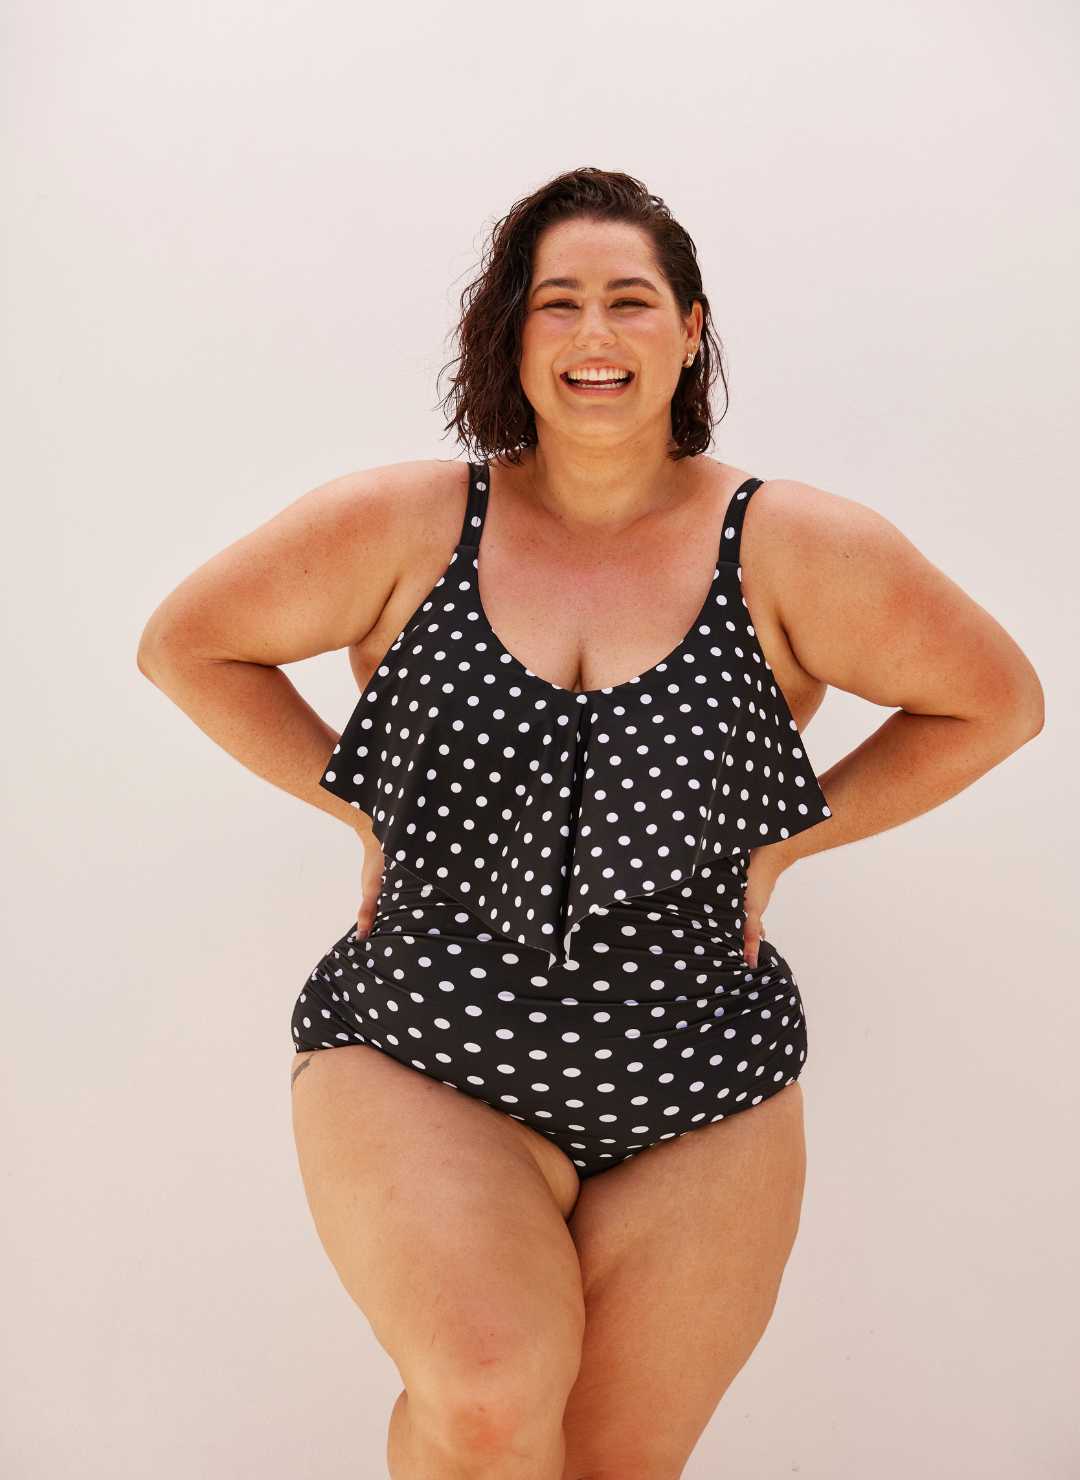 Top 11 Best Swimsuit for Big Thighs (Our List will Surprise You